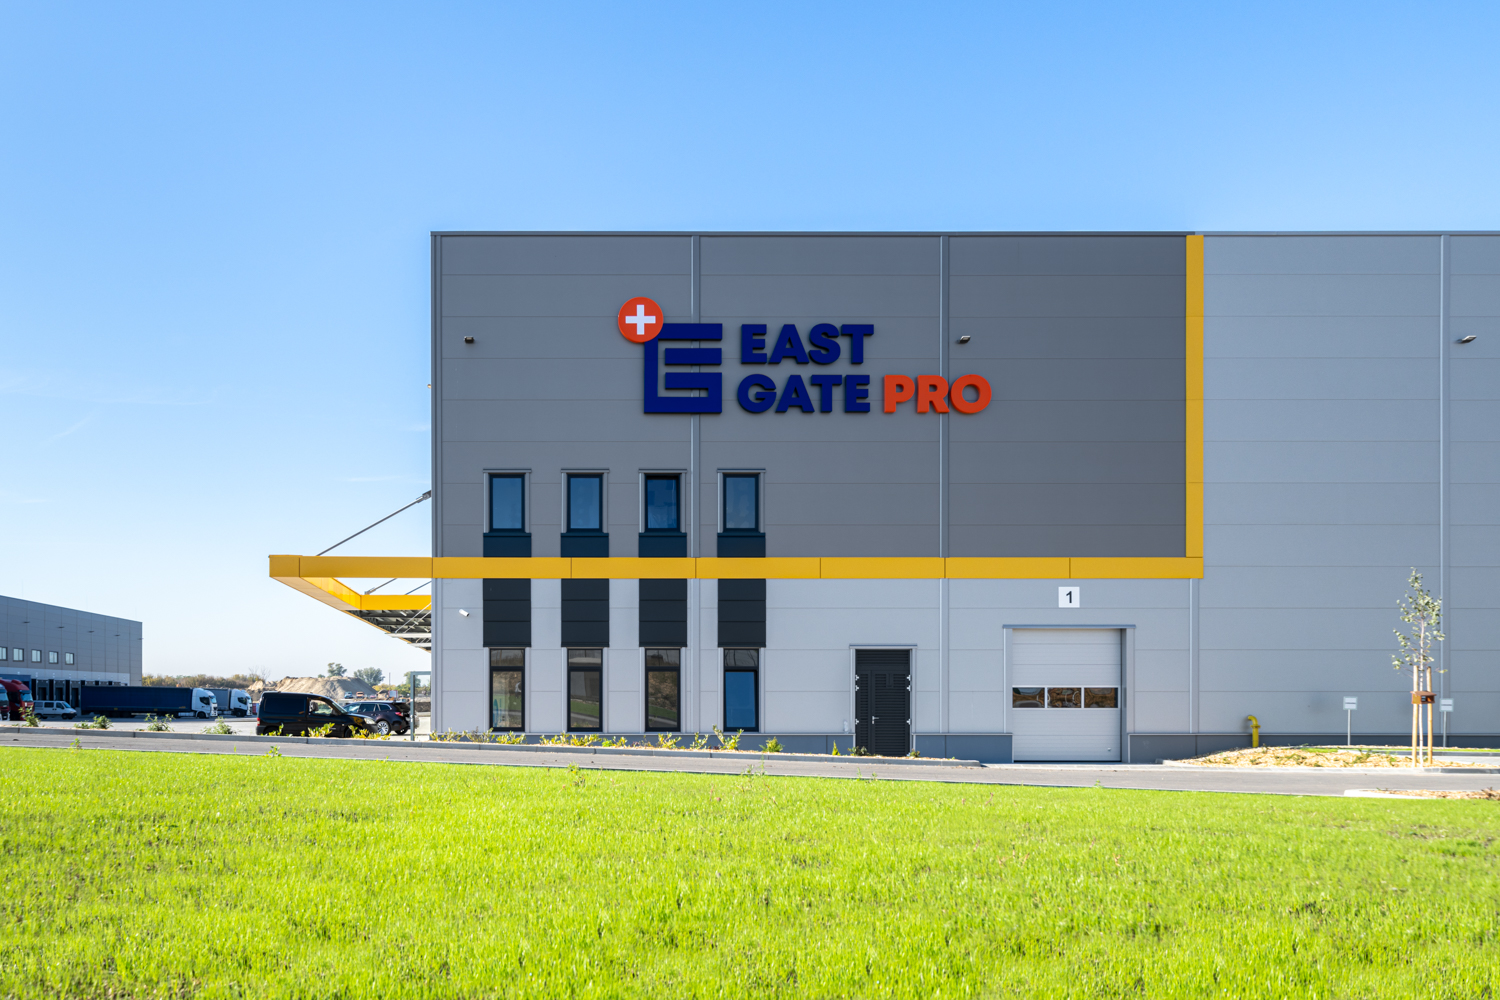 New Tenant at Wing’s East Gate Pro Business Park